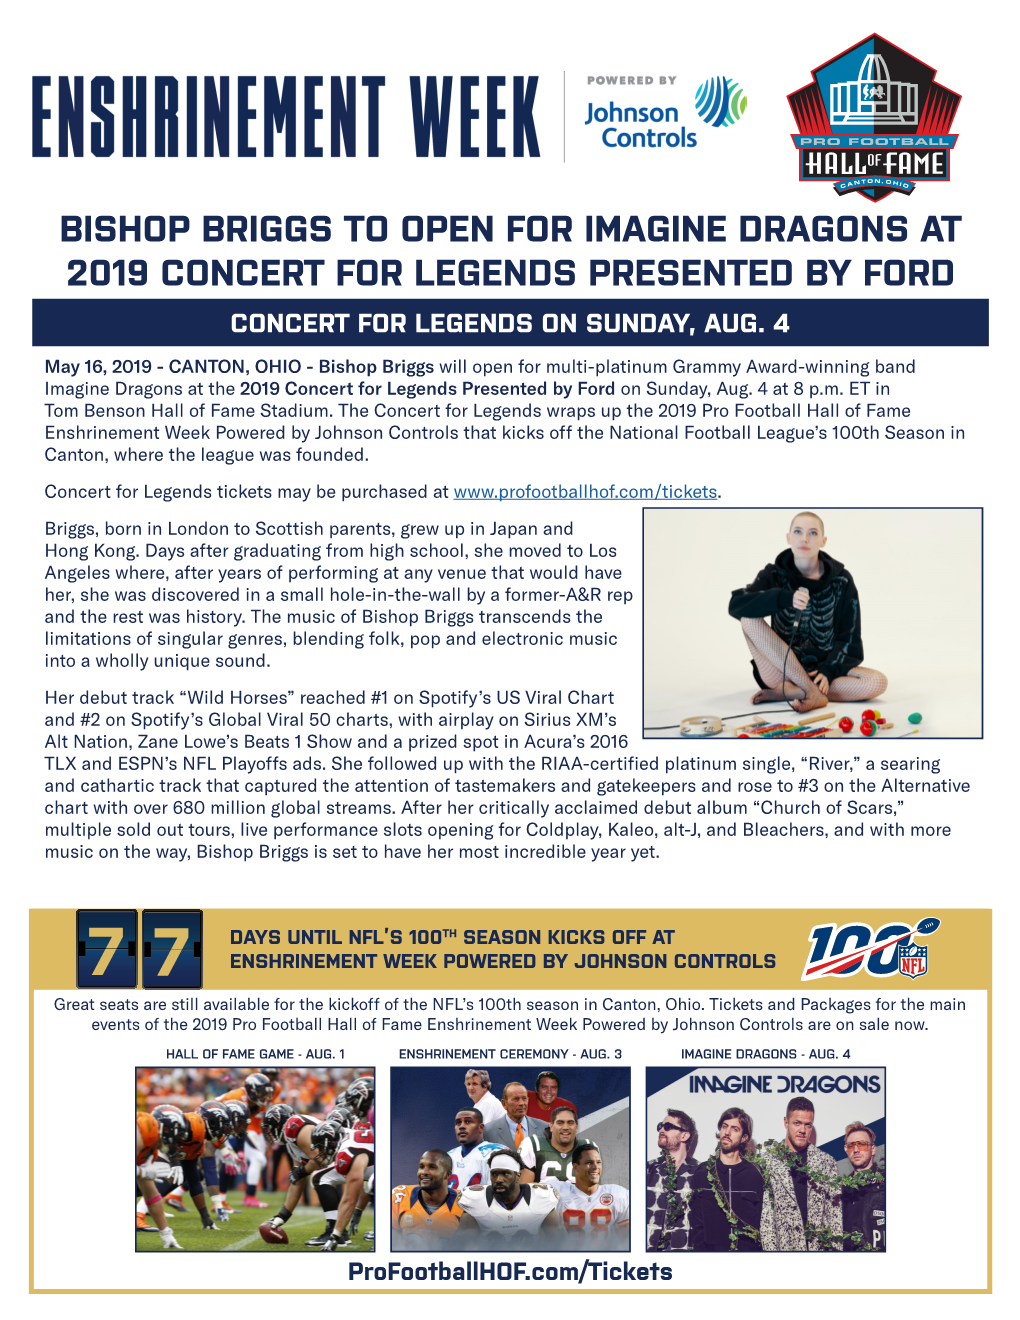 Bishop Briggs to Open for Imagine Dragons at 2019 Concert for Legends Presented by Ford Concert for Legends on Sunday, Aug